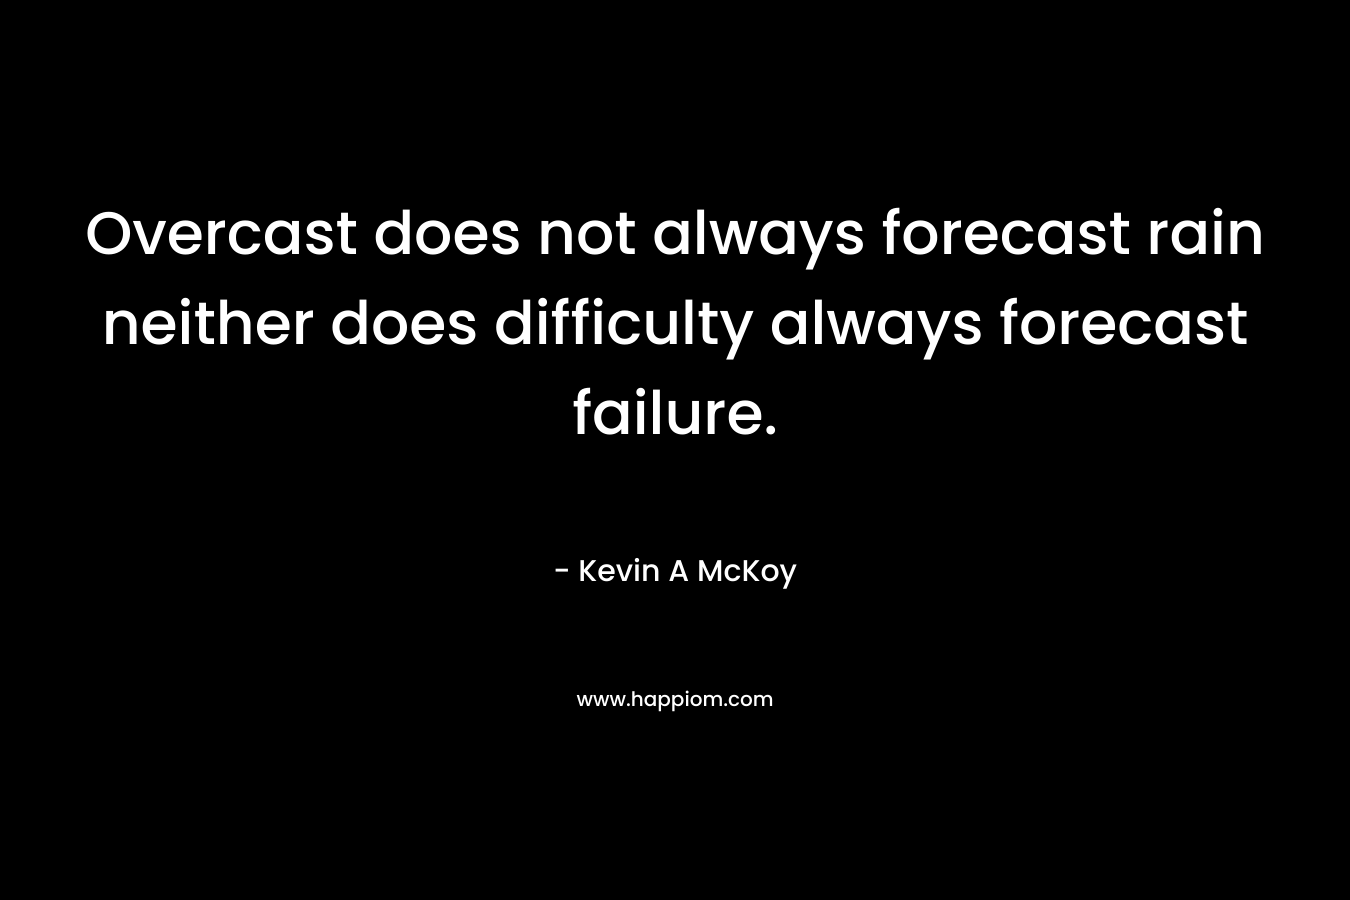 Overcast does not always forecast rain neither does difficulty always forecast failure. – Kevin A McKoy